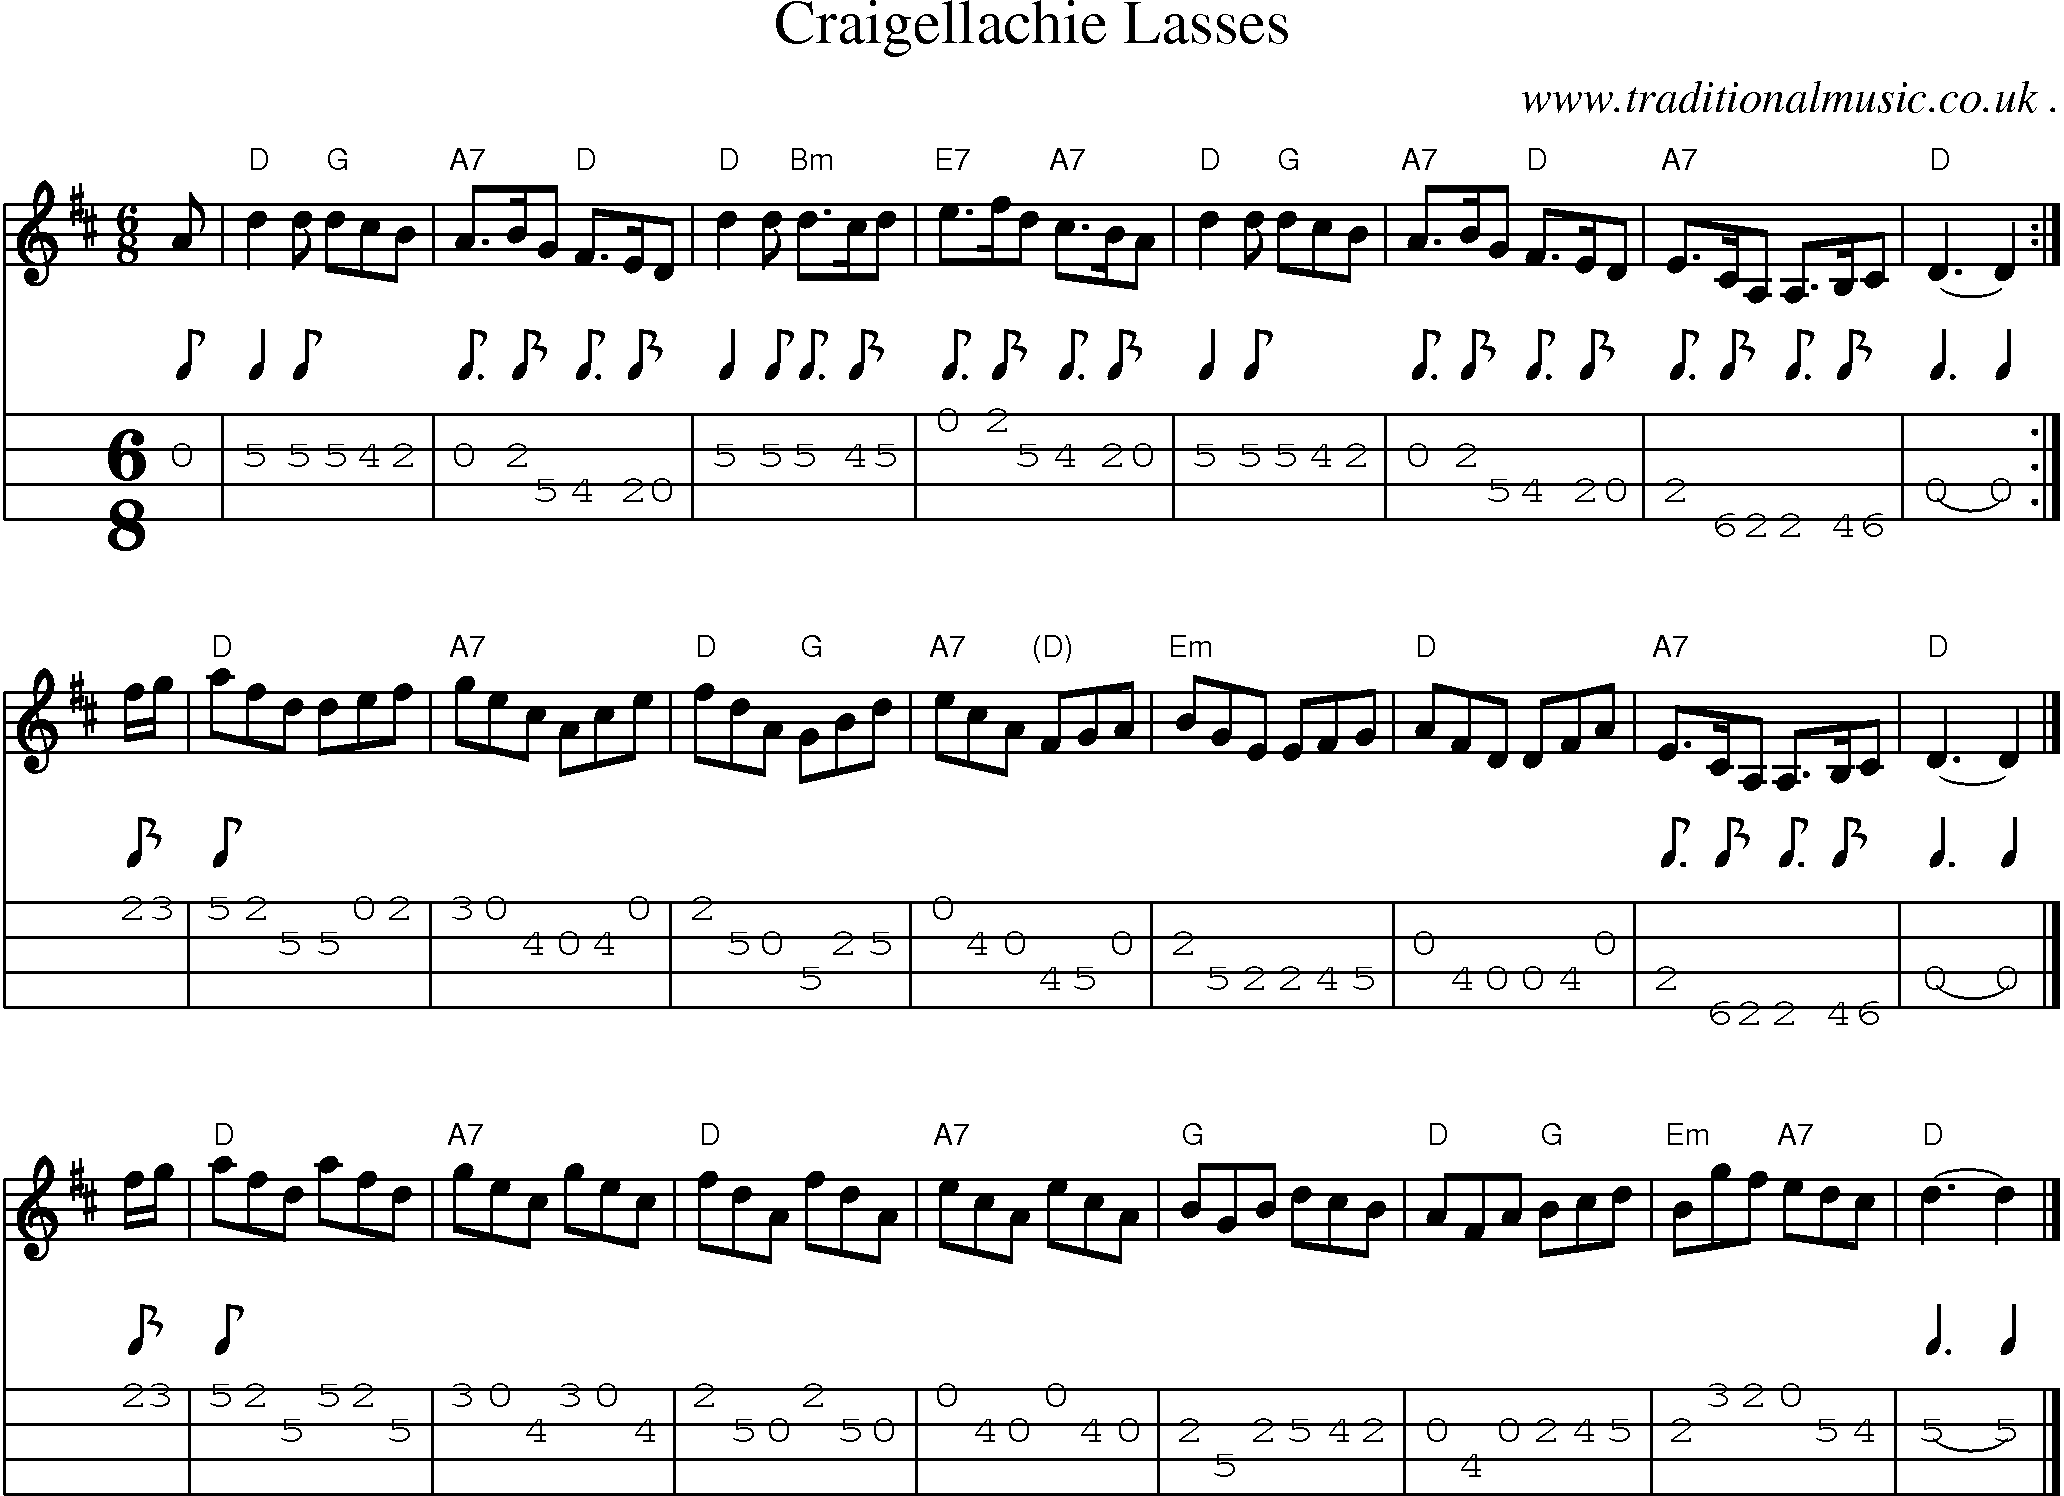 Sheet-music  score, Chords and Mandolin Tabs for Craigellachie Lasses